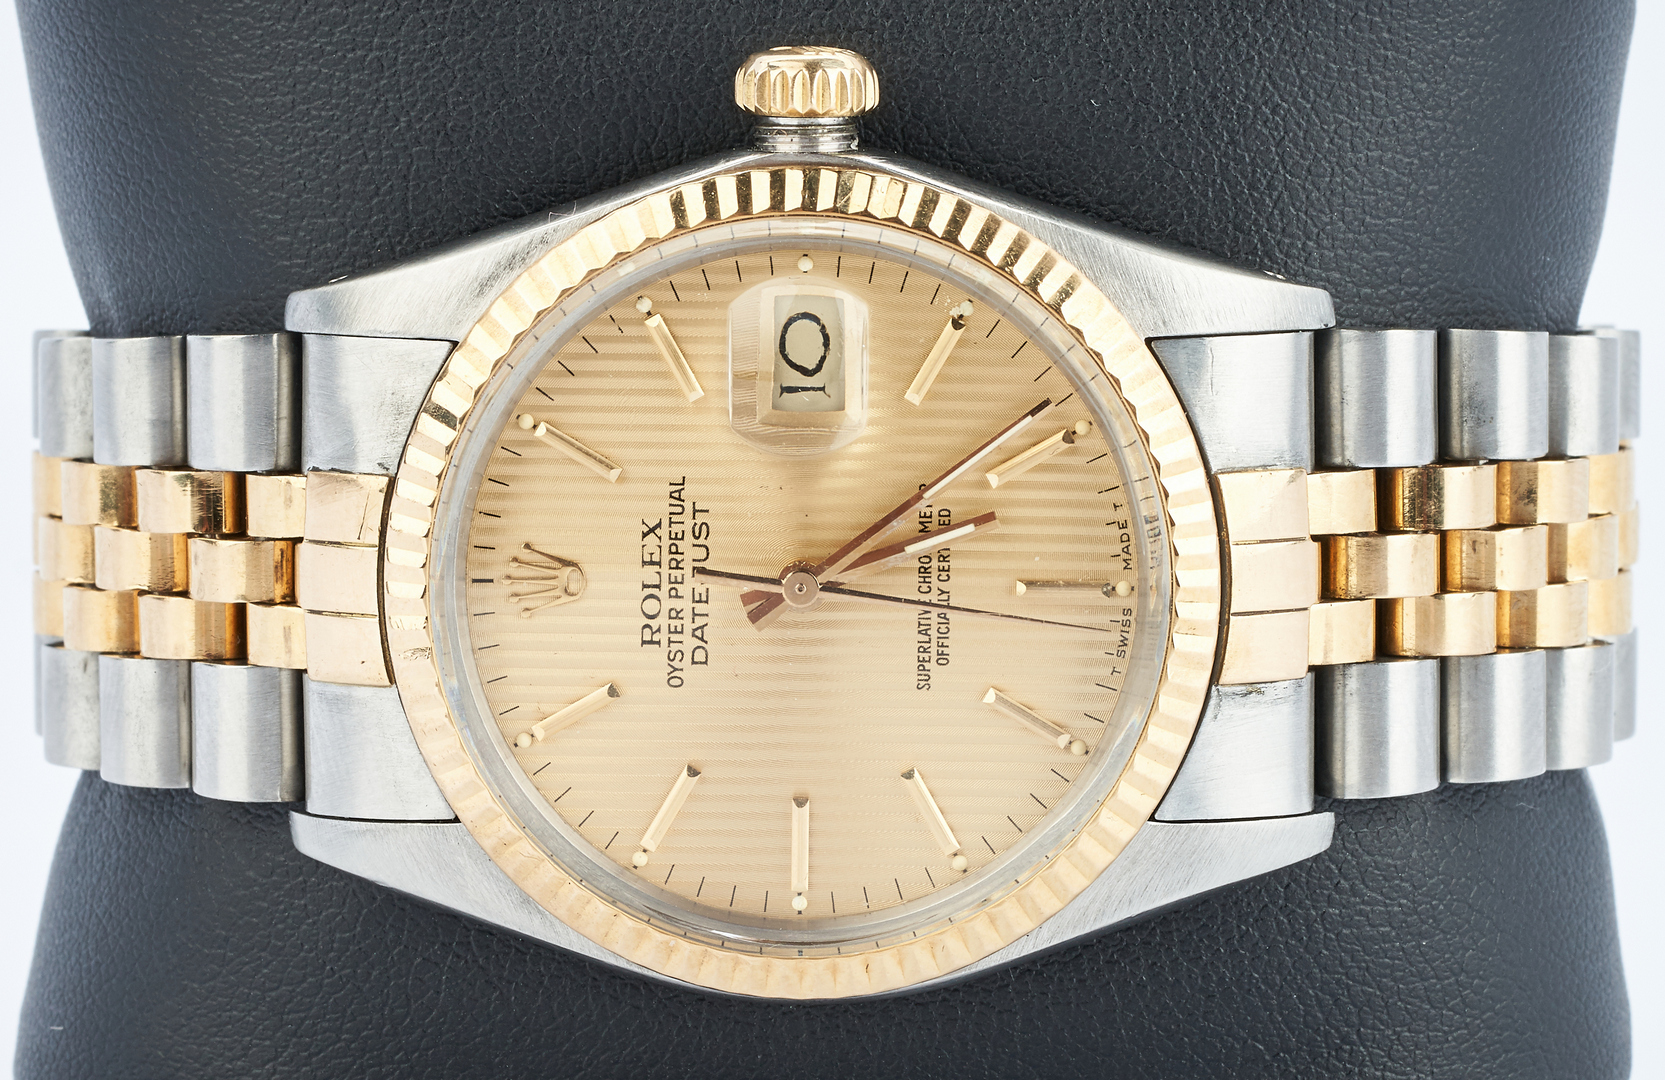 Lot 22: Mens Rolex Oyster Perpetual Datejust Wristwatch